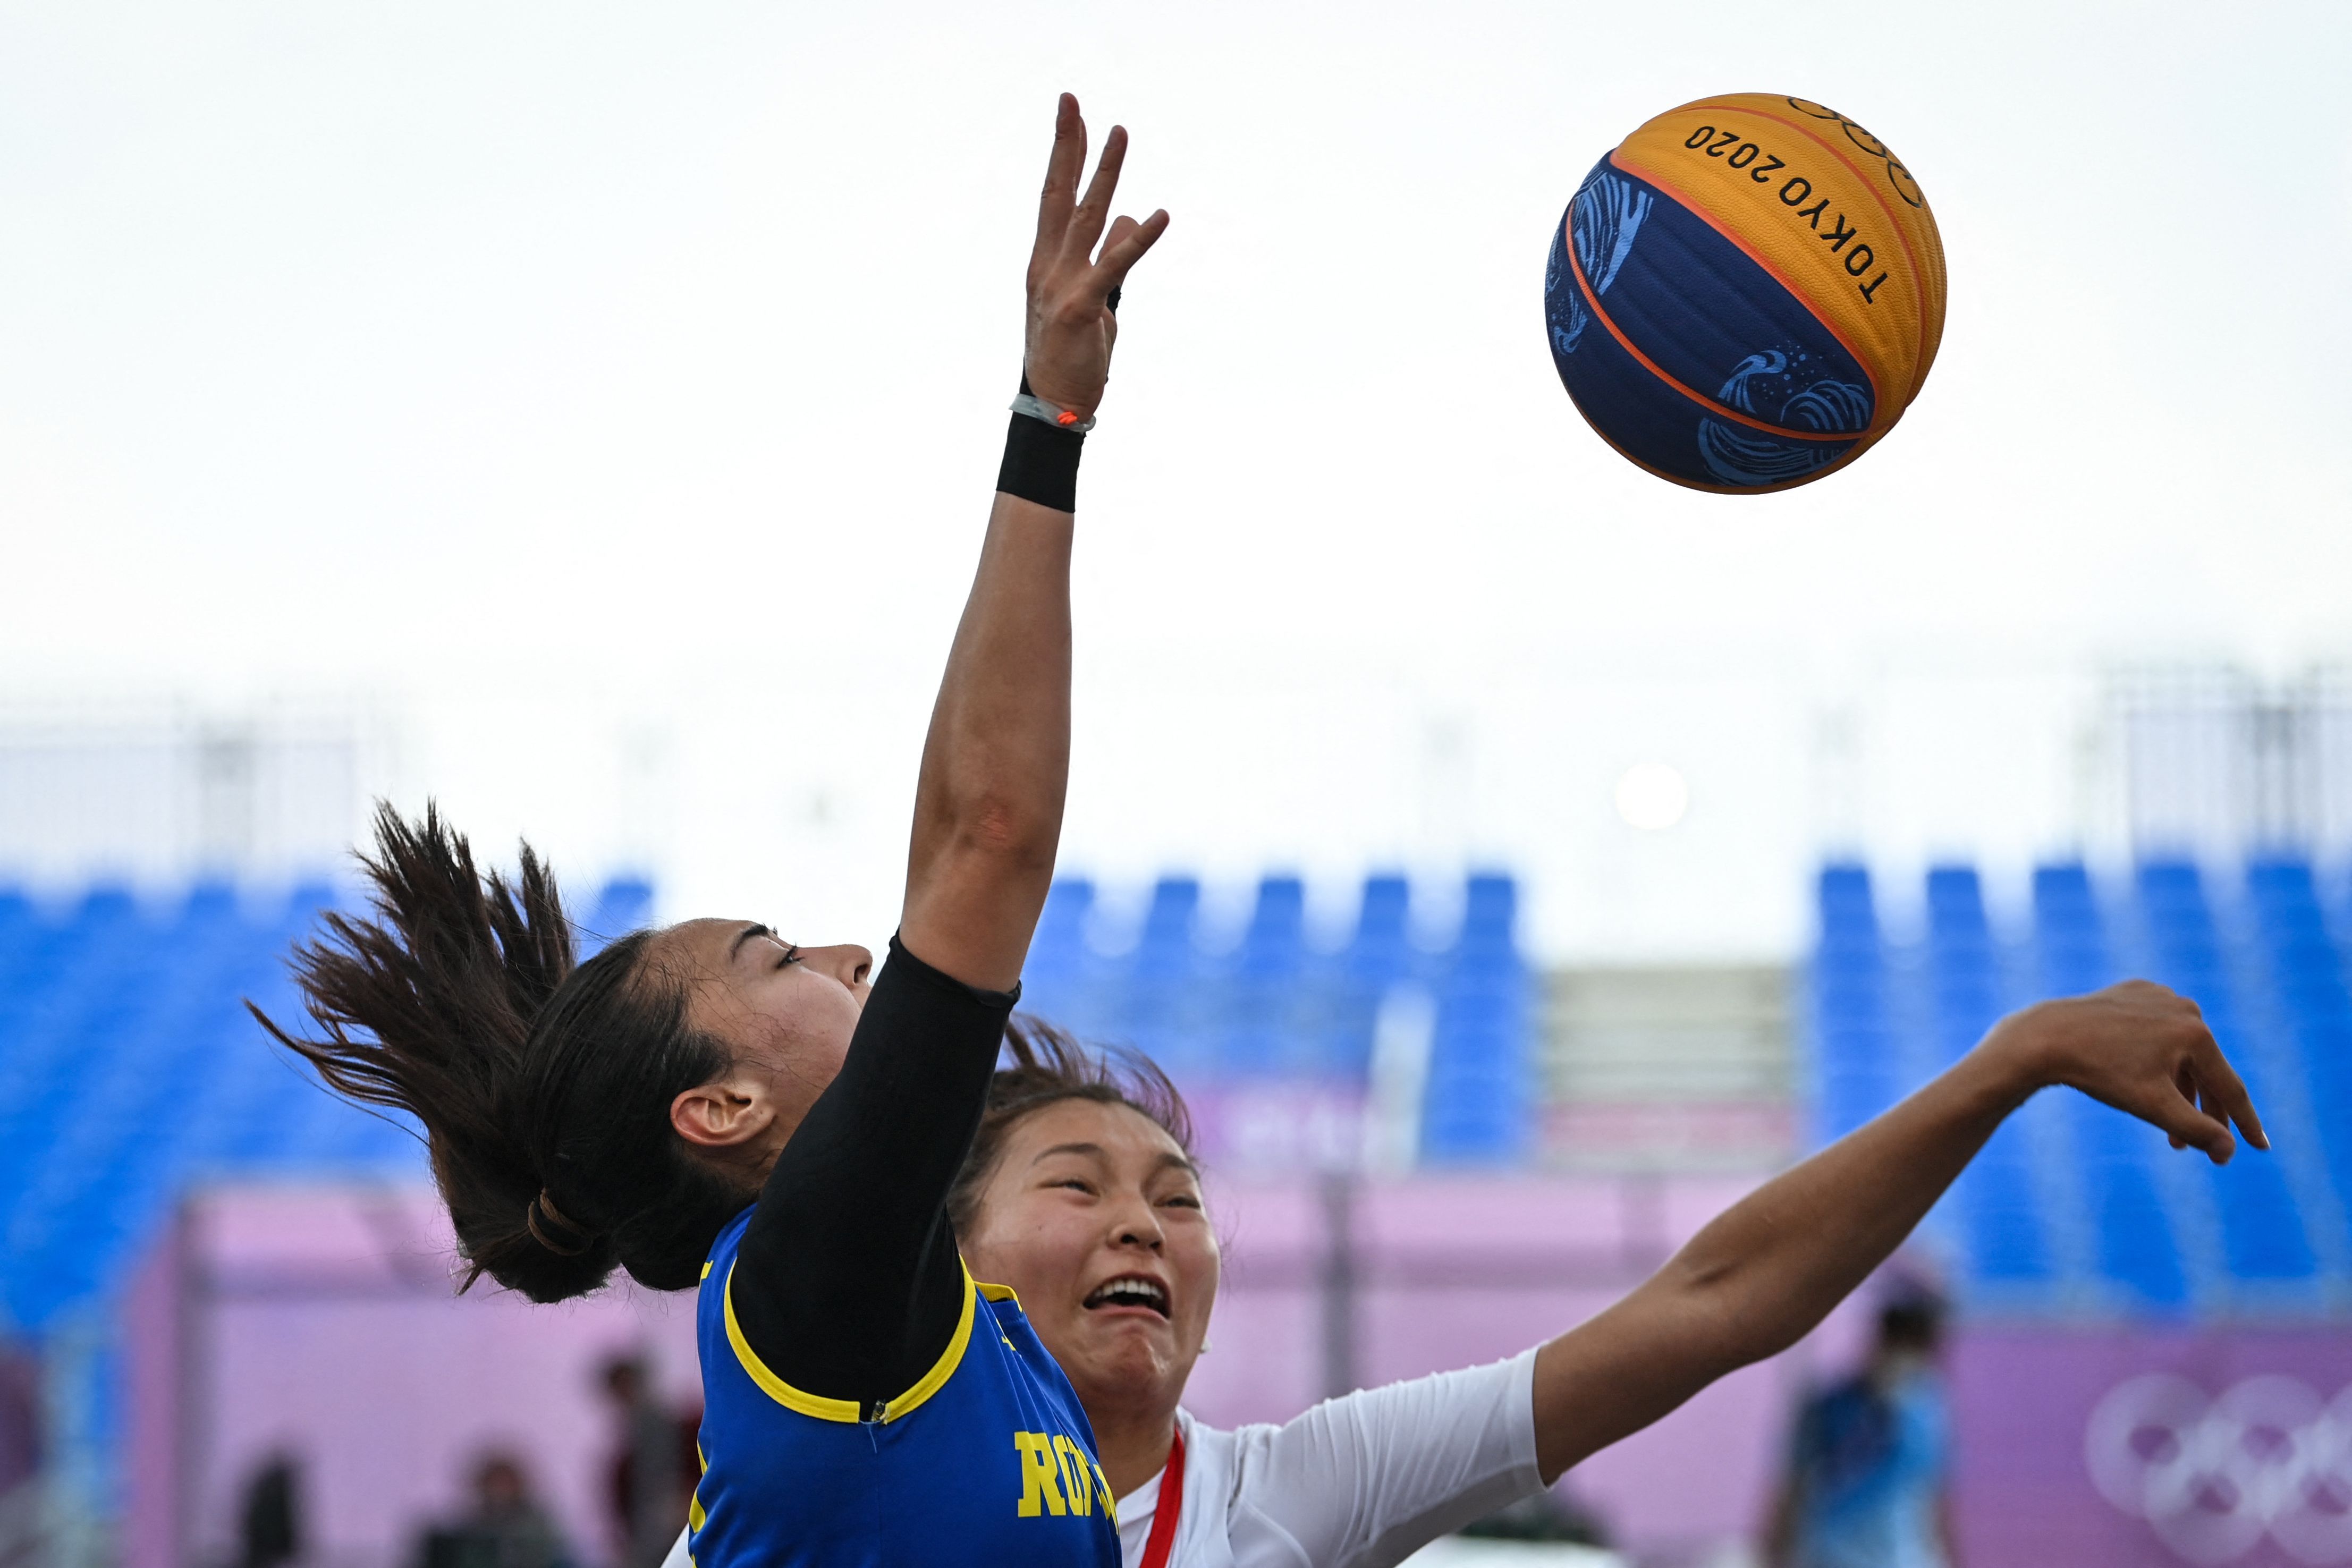  Romania's Sonia Ursu (L) fights for the ball with Mongolia's Khulan Onolbaatar at the women's 3x3 basketball match between Mongolia and Romania at the Aomi Urban Sports Park in Tokyo, on July 26